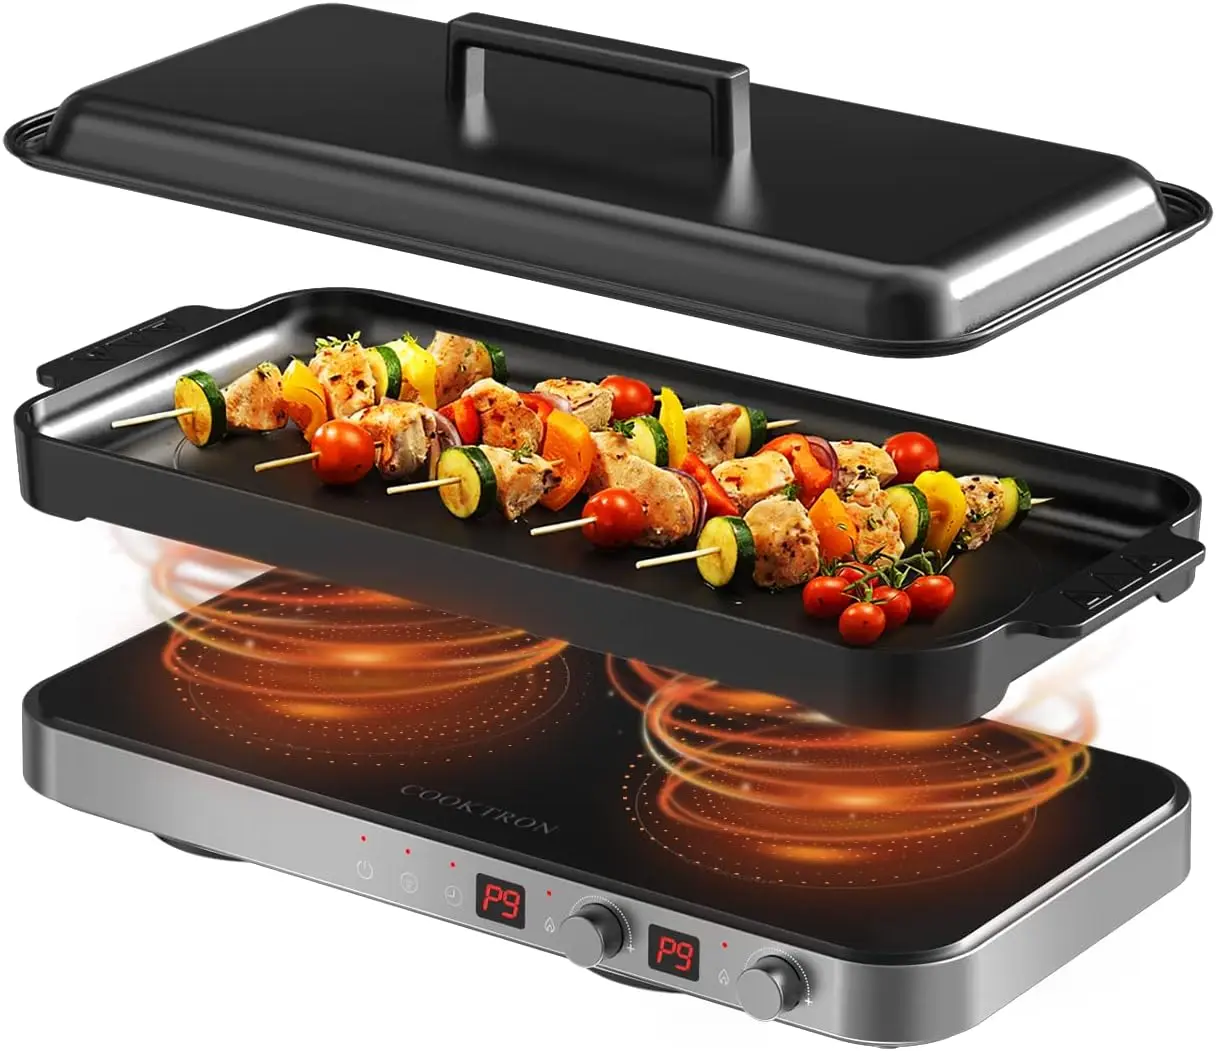 

Induction Cooktop 2 Burner with Removable Iron Cast Griddle Pan Non-stick, 1800W Double Induction Cooktop with Child Safety Loc